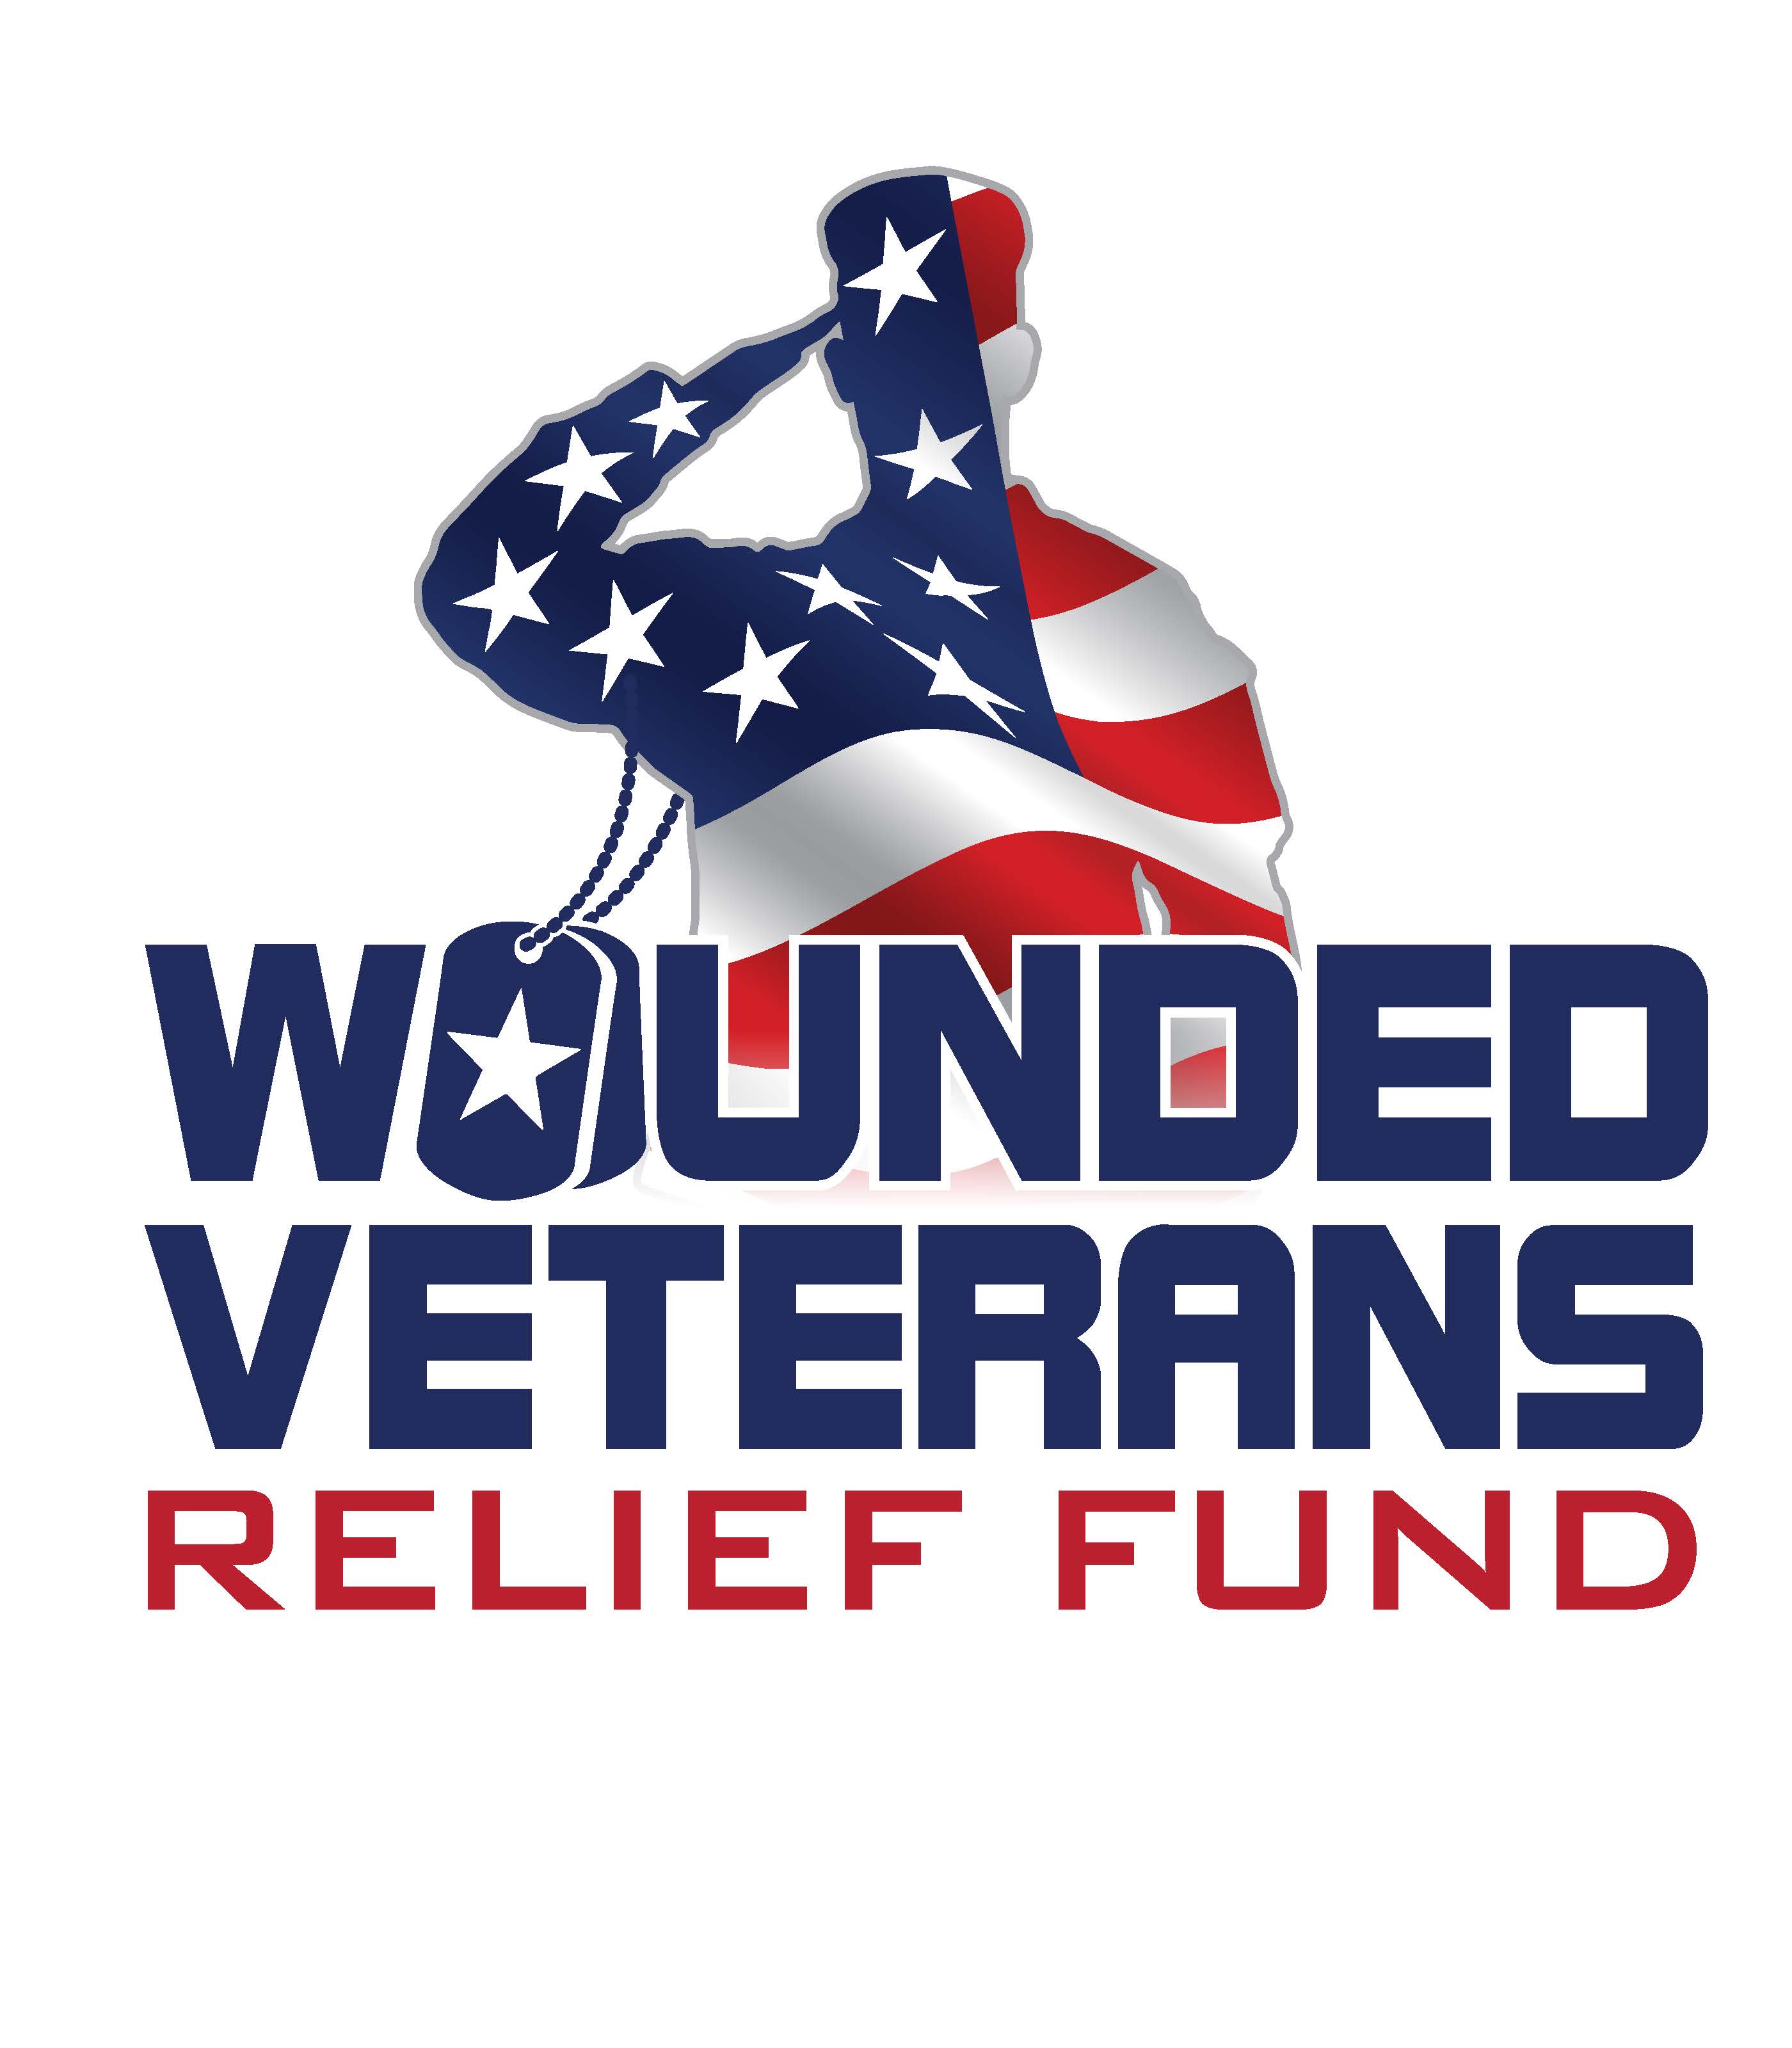 Wounded Vetrans Relief Fund Logo 2